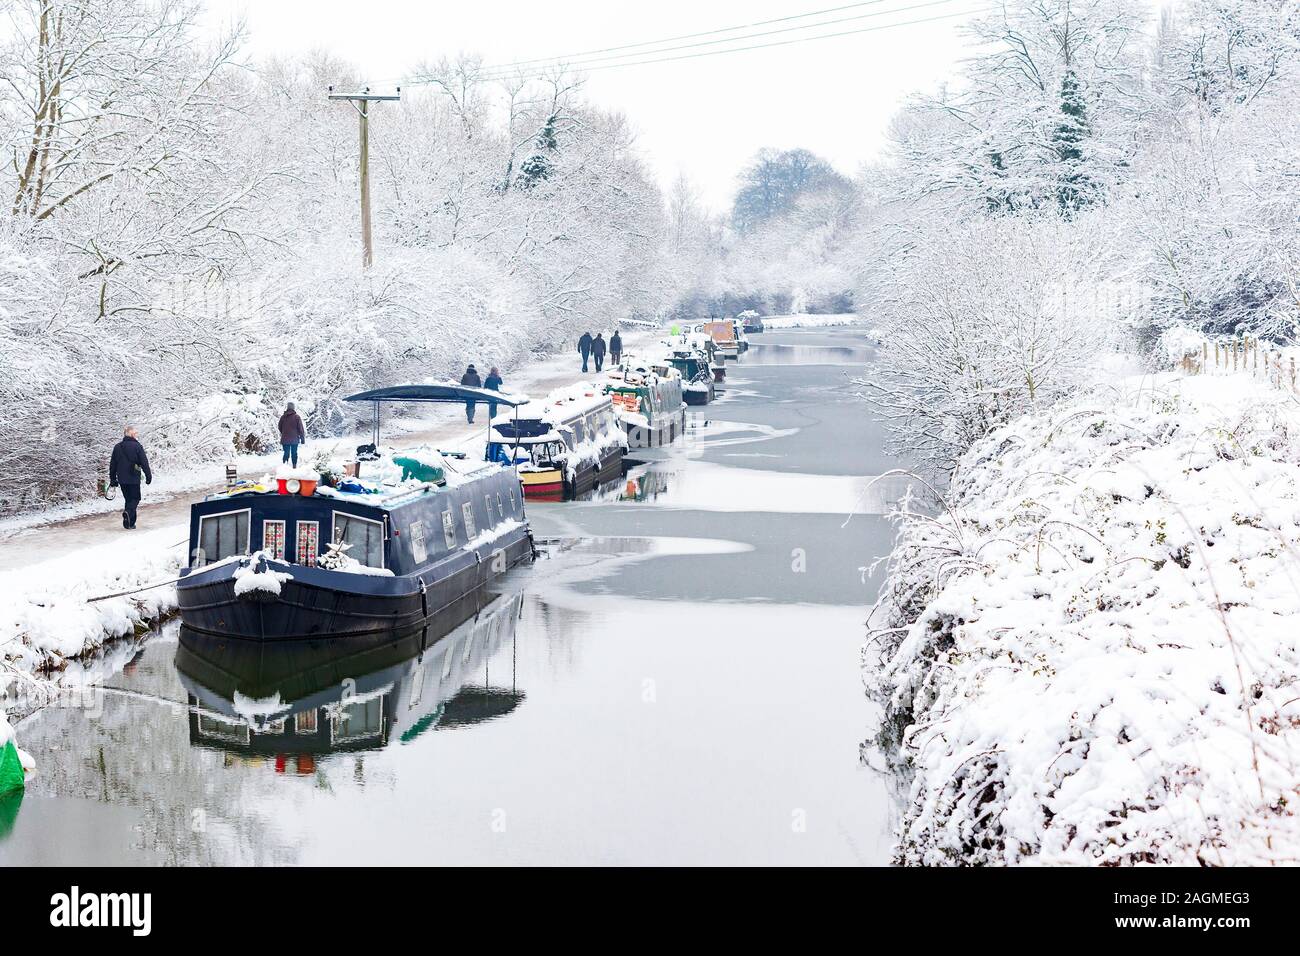 BATH, UK - 19 JAN : Walkers pass moored boats on the Kennet and Avon canal in the snow on 19th Jan 2013. The boats stay moored throughout the winter Stock Photo